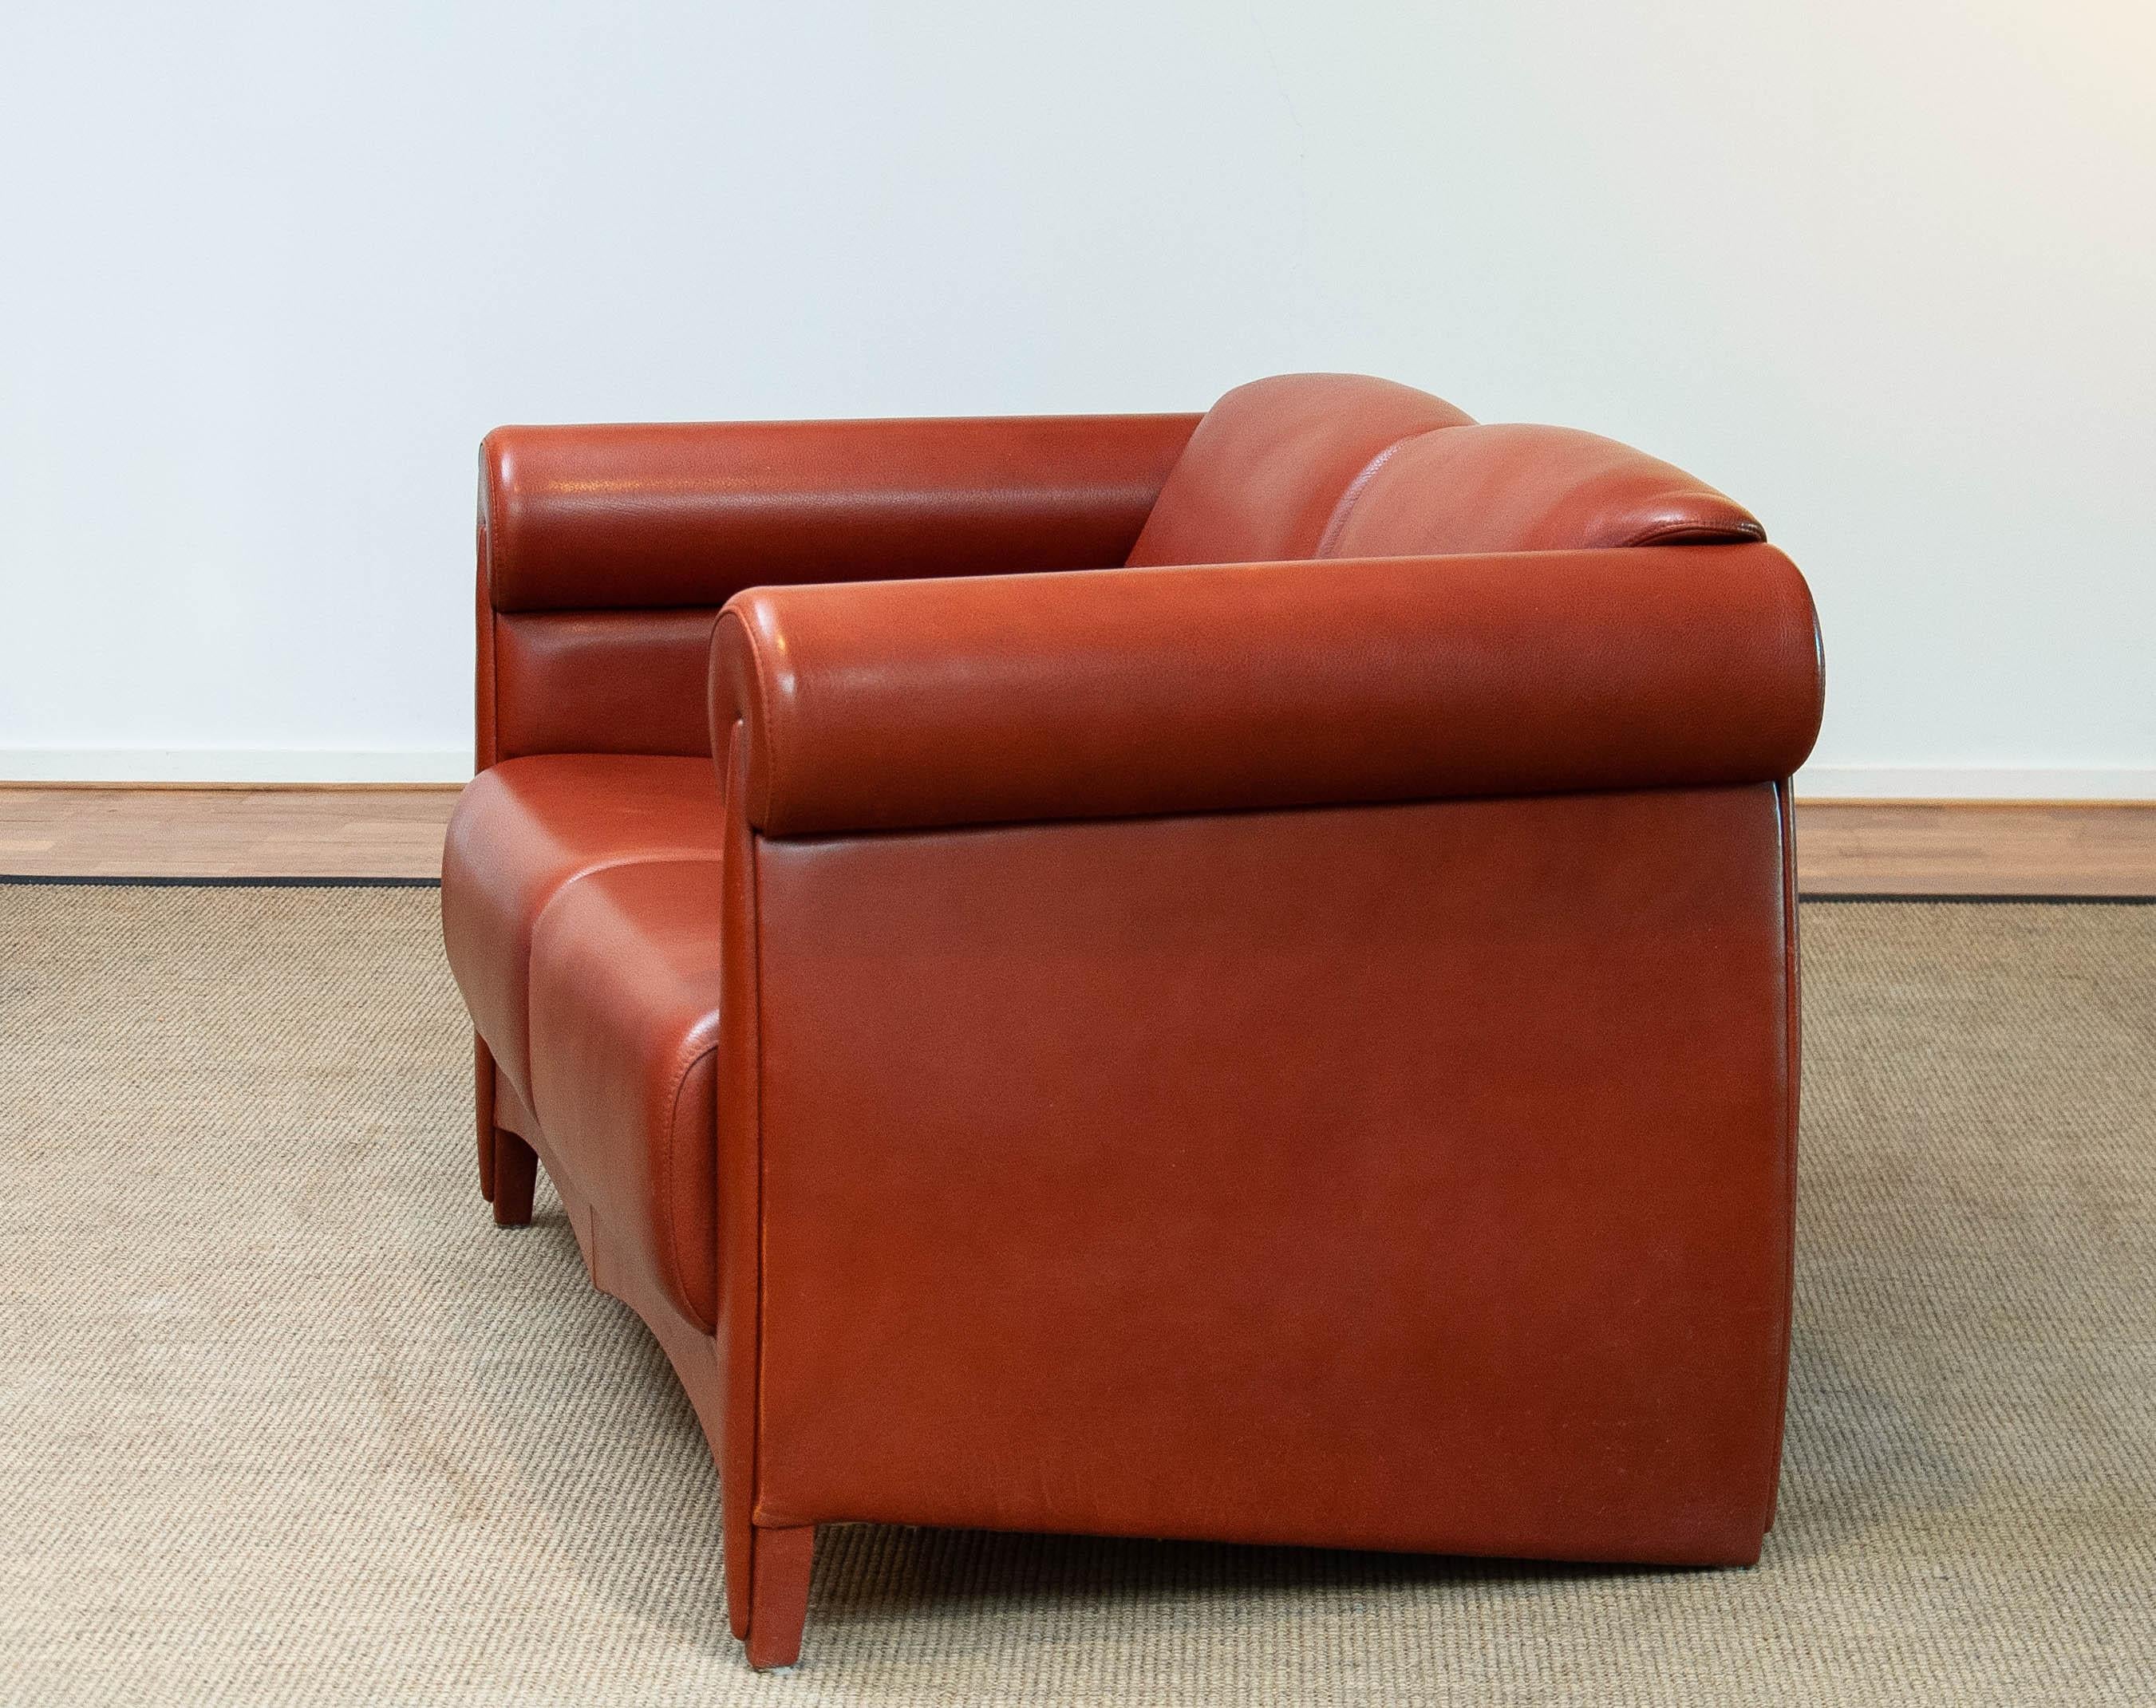 1980s Modern Two Seater Sofa in Cognac Leather by Klaus Wettergren Denmark For Sale 2